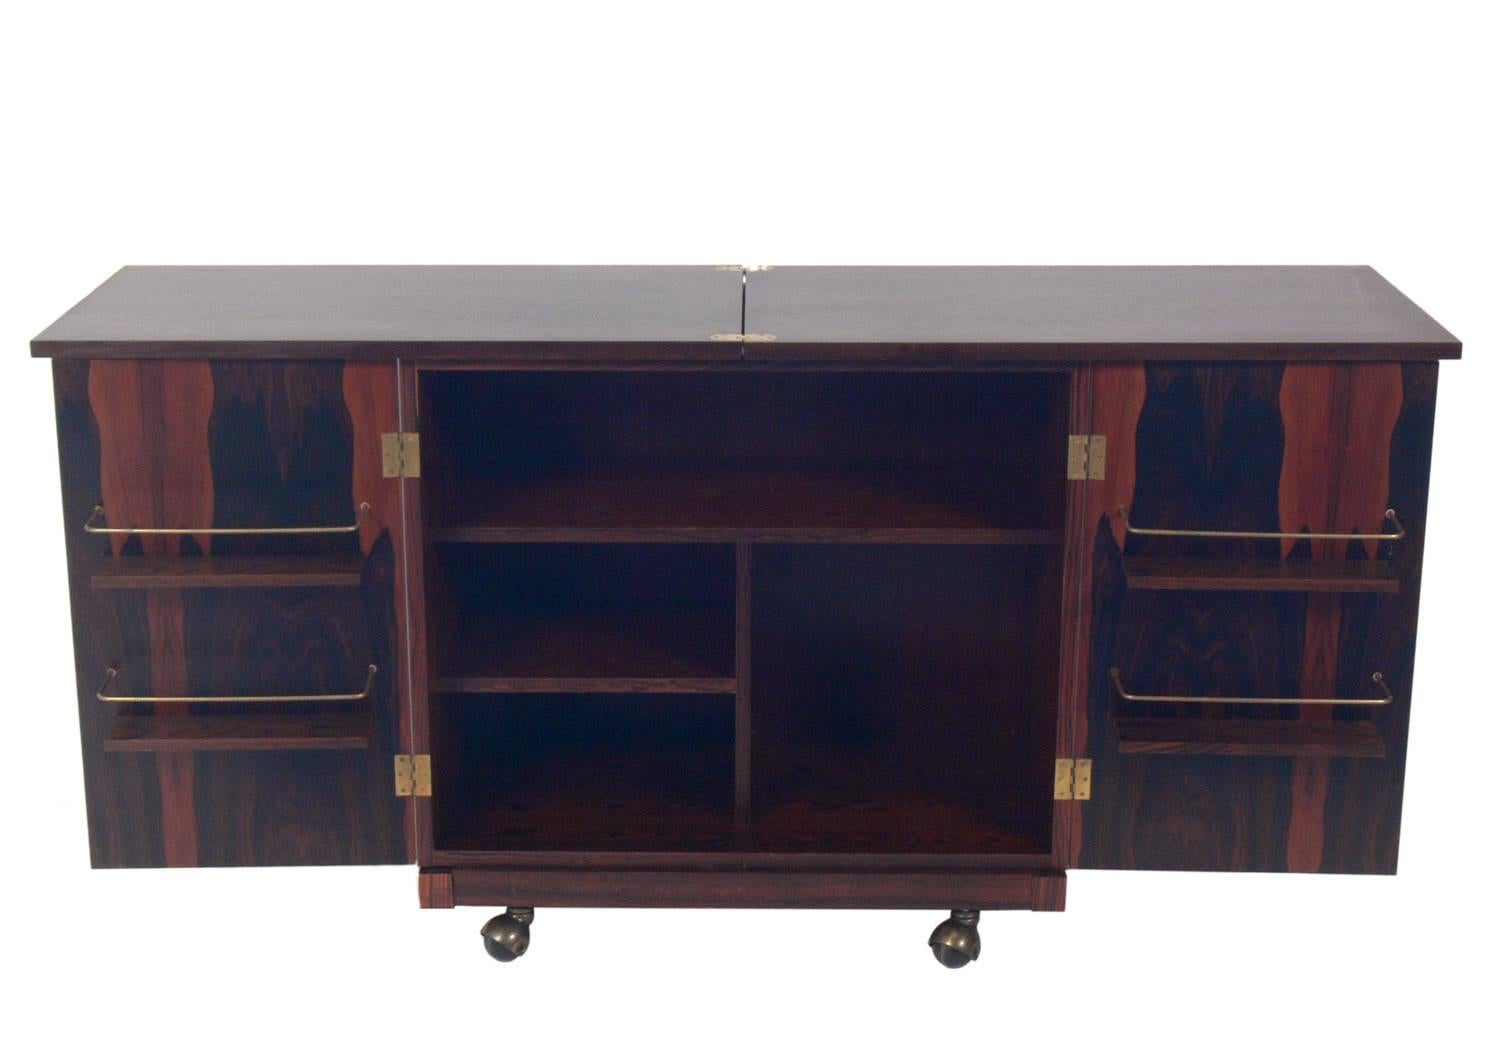 Danish Modern rosewood bar cart, designed by Torbjorn Afdal for Bruksbo, Norway, circa 1960s. The doors open to reveal a voluminous amount of storage, and the top flips open to offer a larger serving or work space. Retains warm original finish.